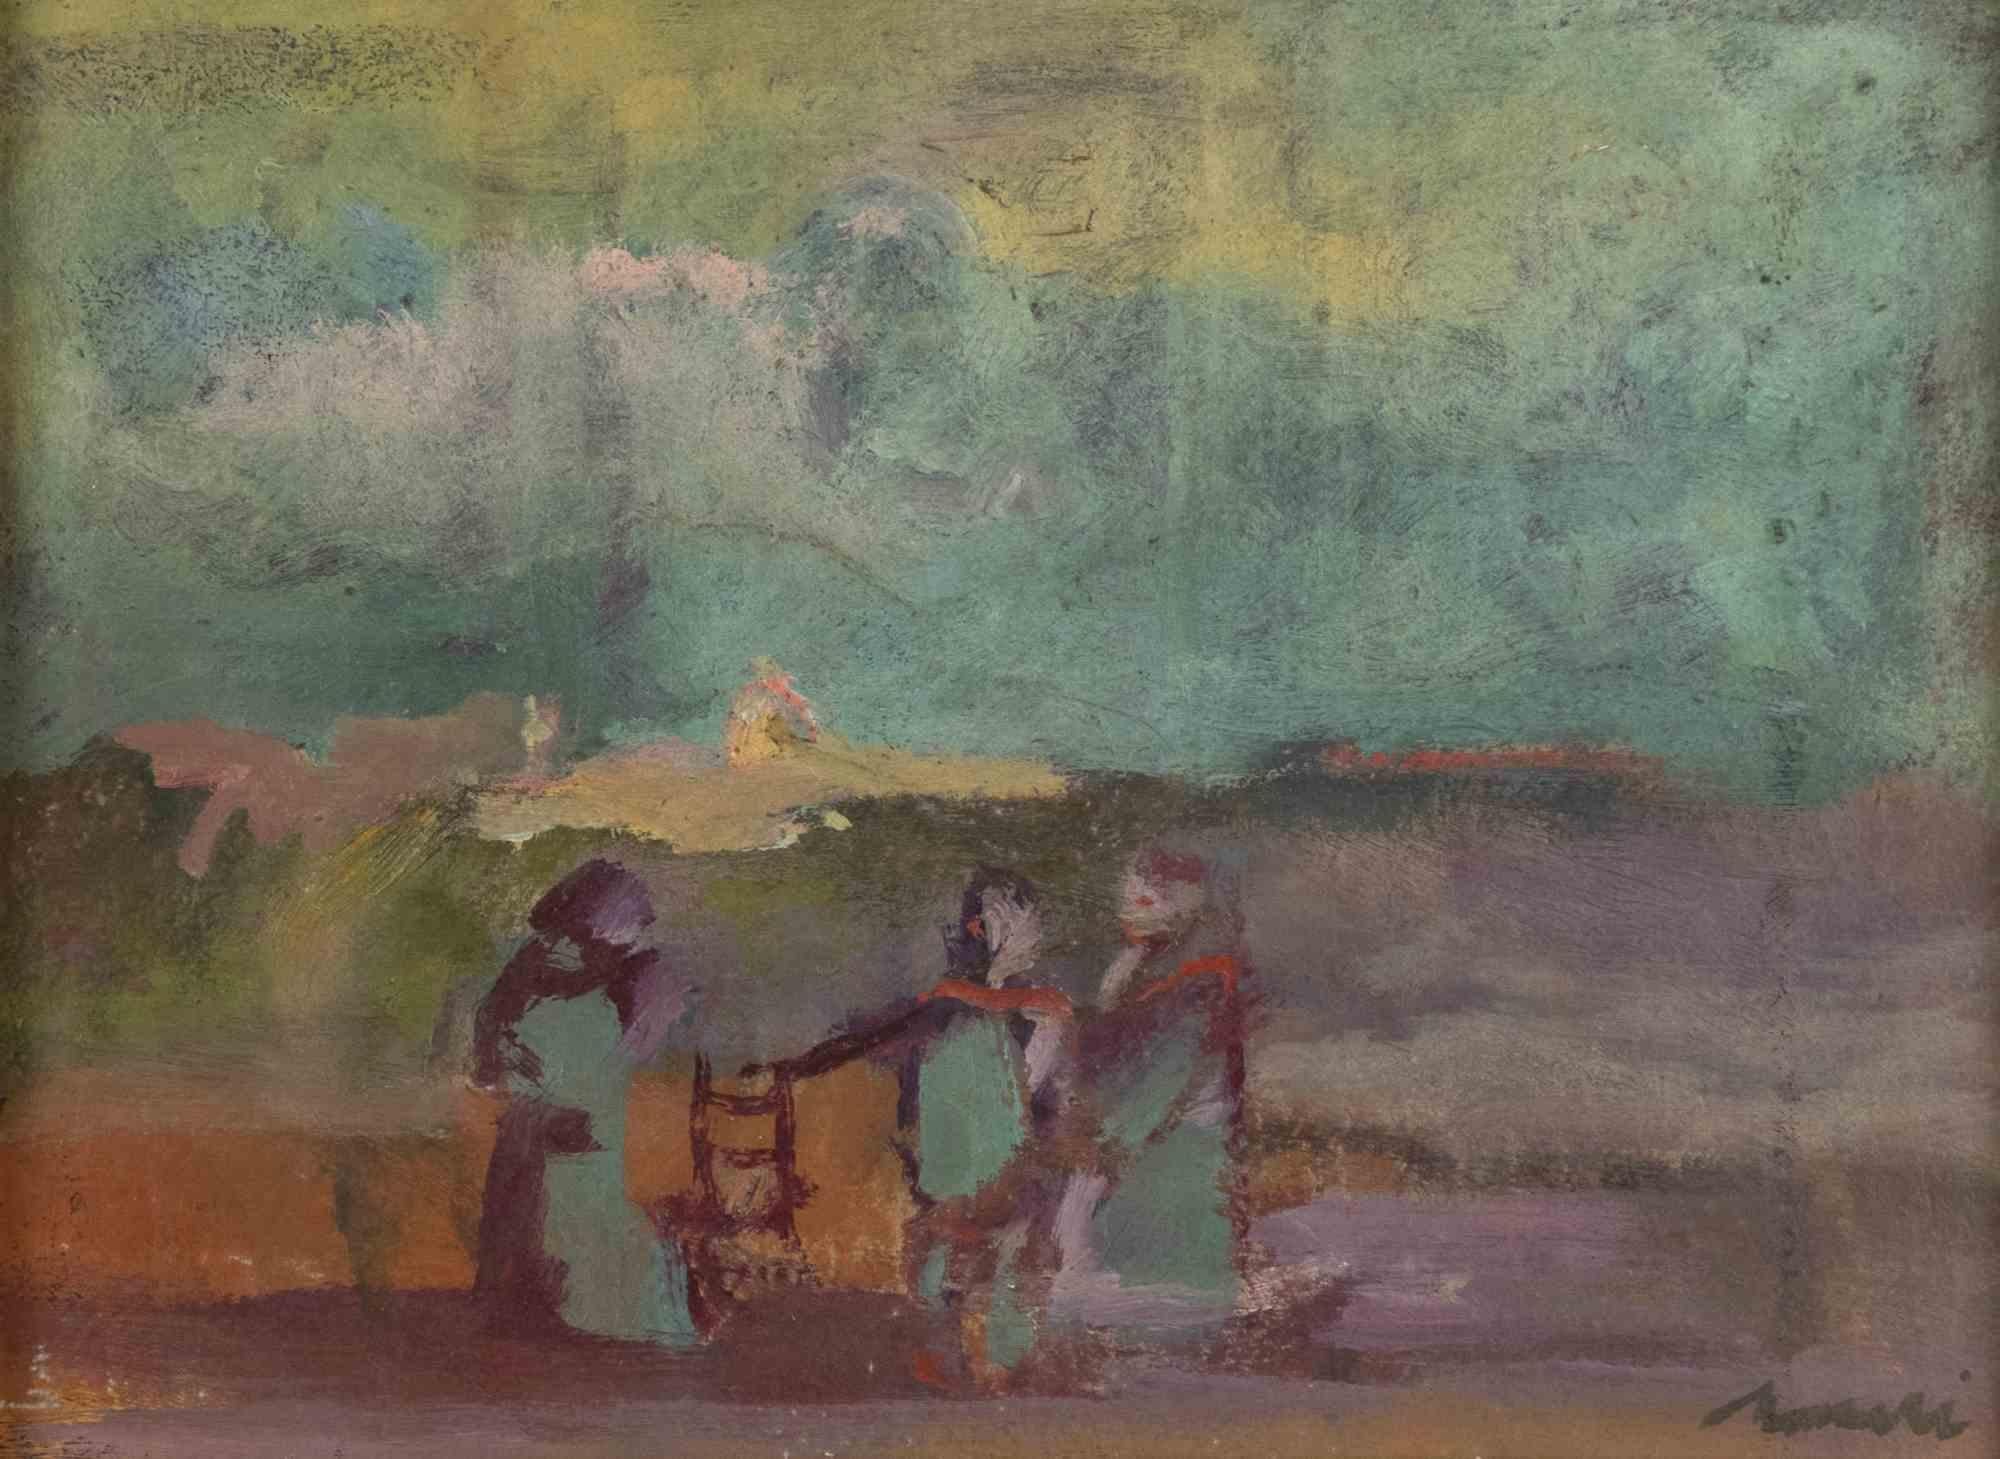 Figures - Oil Painting by Mino Maccari - Mid-20th Century For Sale 2